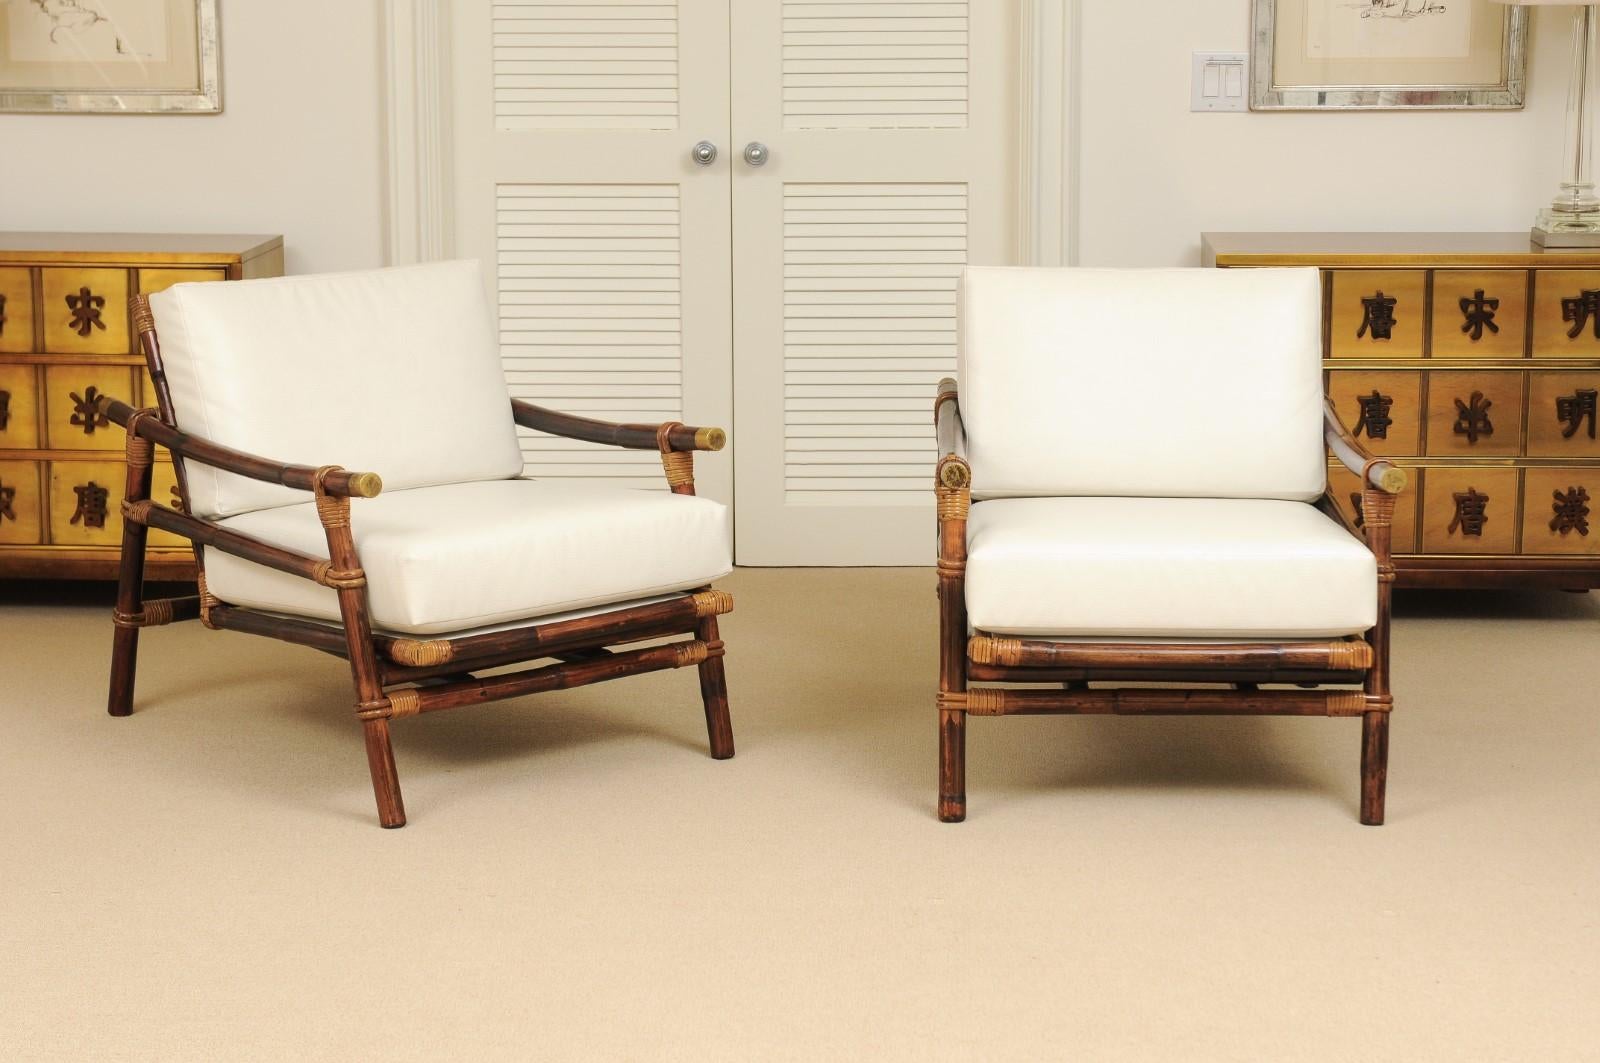 An exceptional pair of vintage Campaign style lounge chairs with matching ottoman from a difficult to find seating series. Stout rattan and hardwood frame with a beautiful raffia seat back. Handsome solid brass accents mark the arms. Fabulous